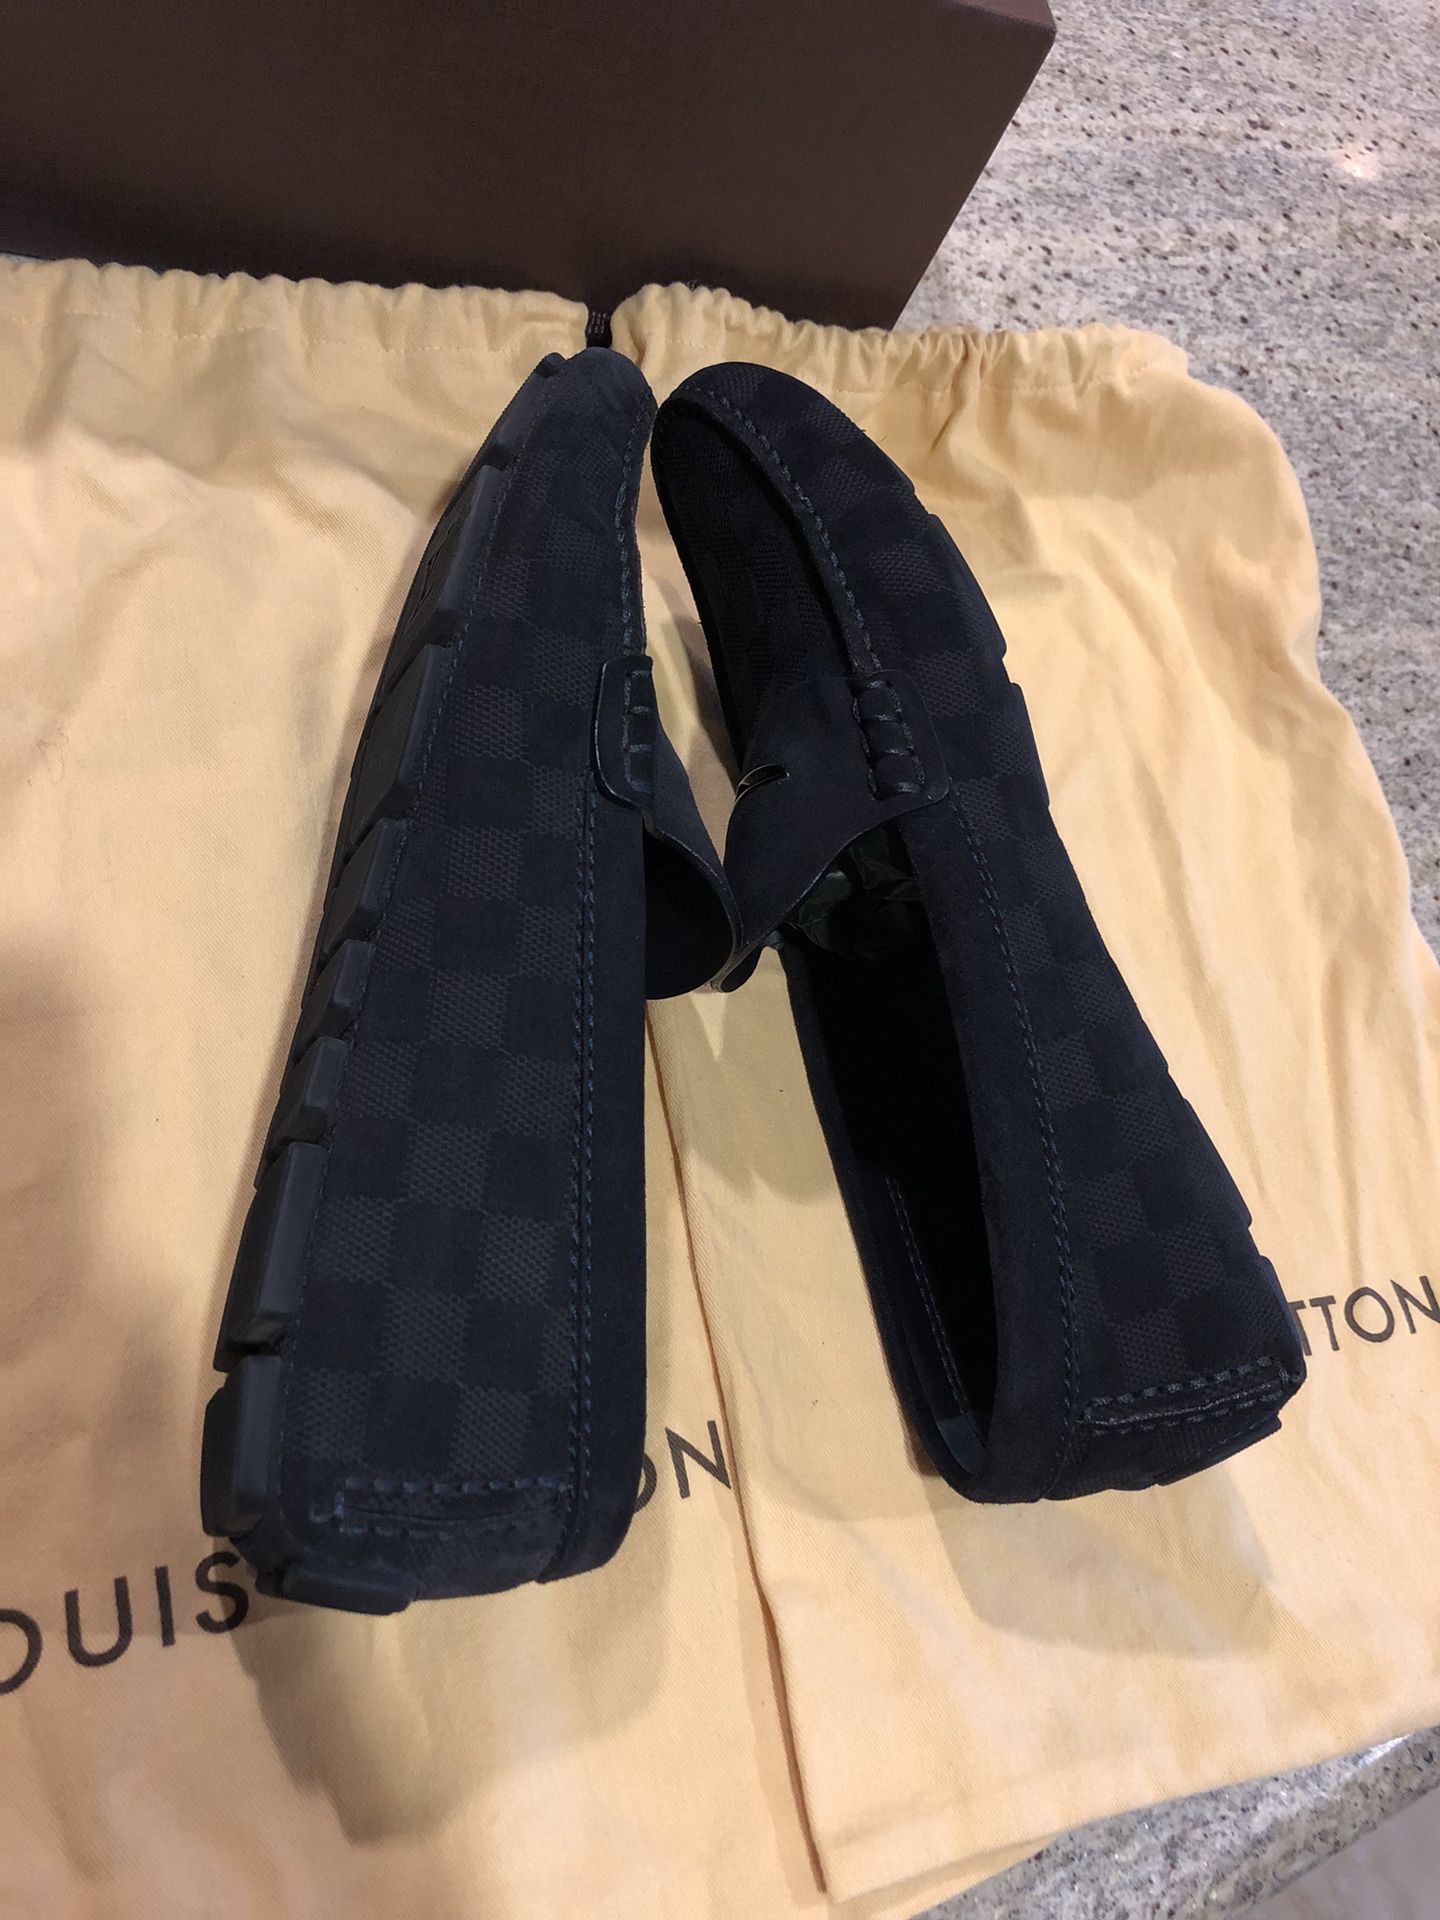 Louis Vuitton loafers 7 1/2, USED/ PERFECT CONDIOTION for Sale